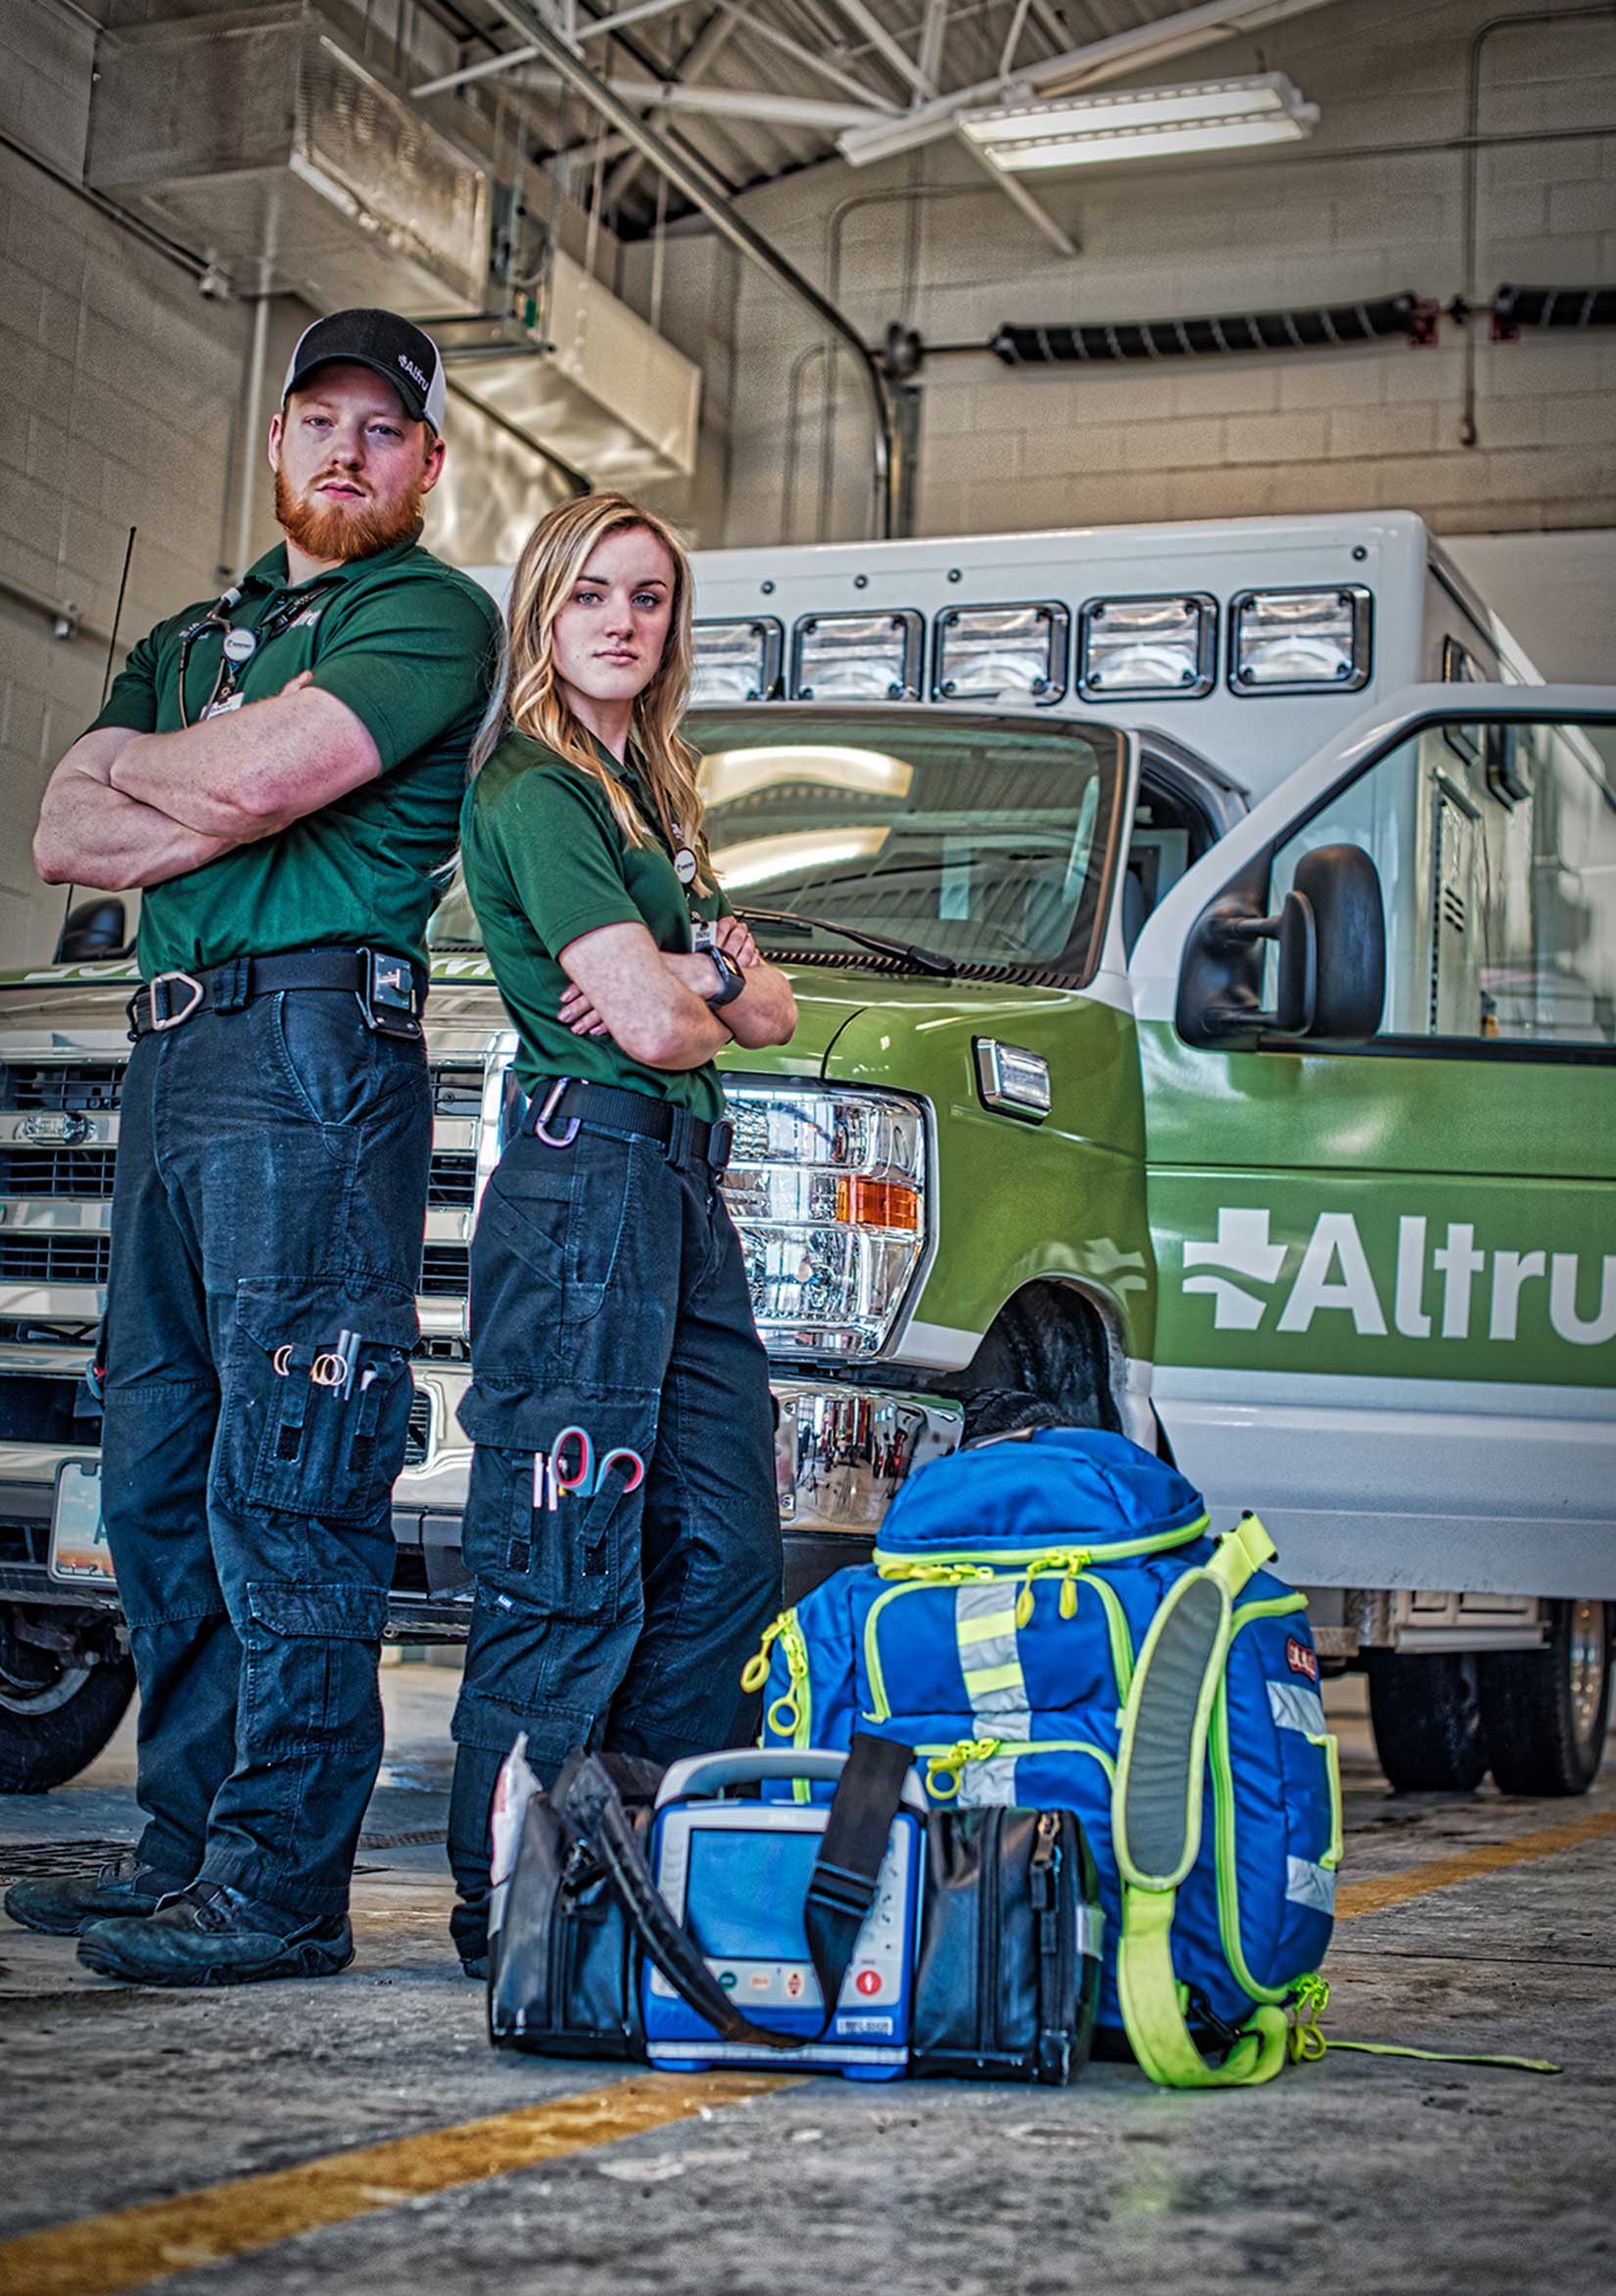 Professional photograph of two first responders for Altru posing in front of an ambulance